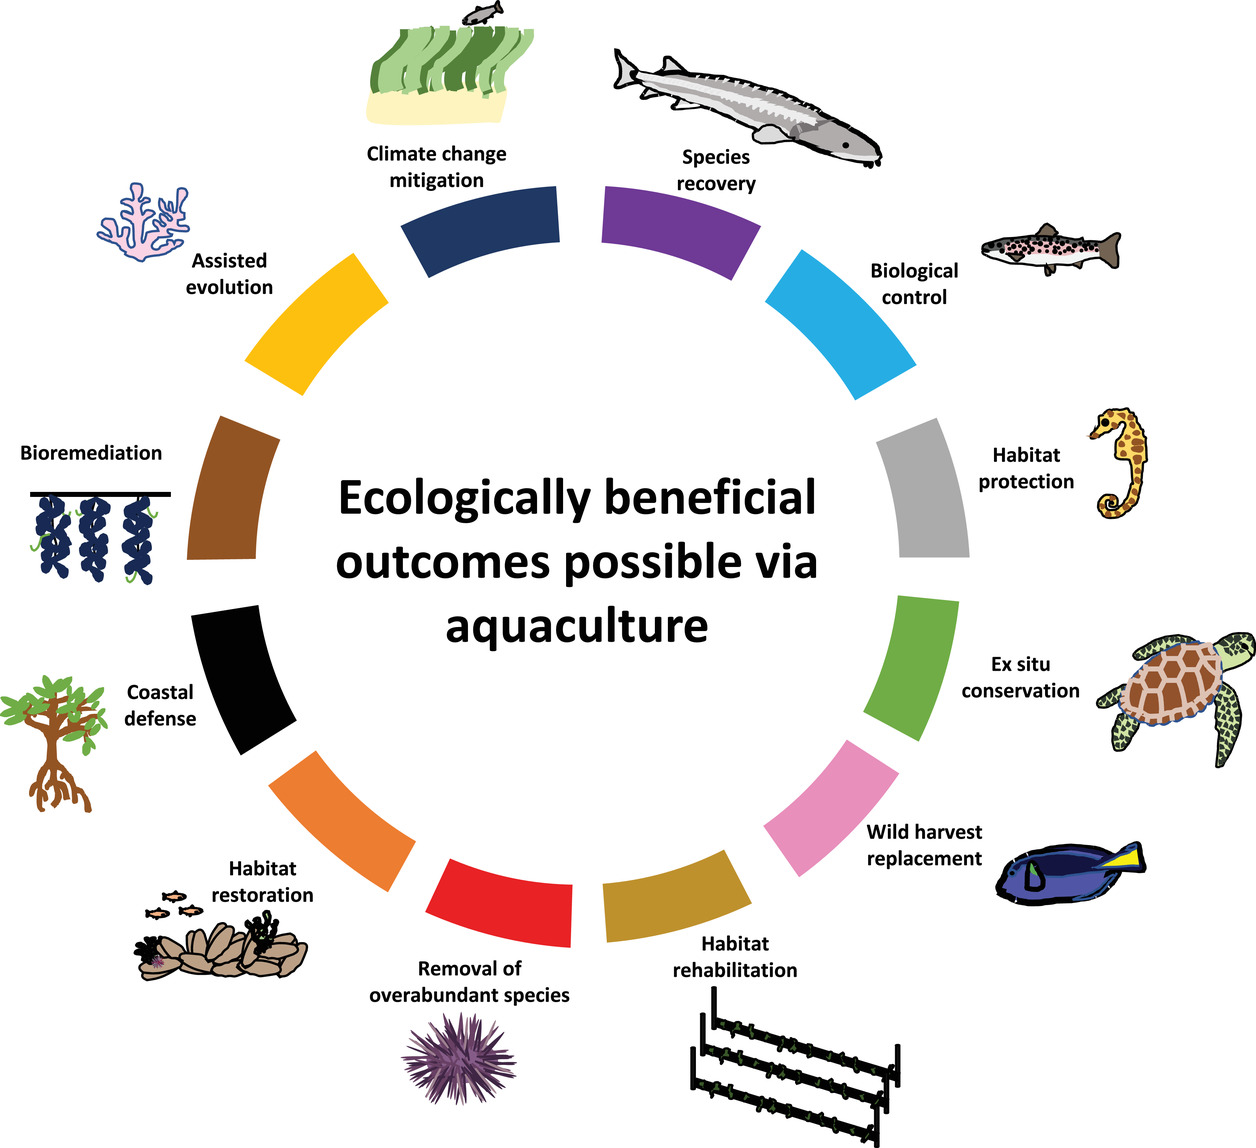 The 12 ecologically beneficial outcomes that can be achieved through aquaculture. A particular aquaculture activity may deliver several of these outcomes at once.